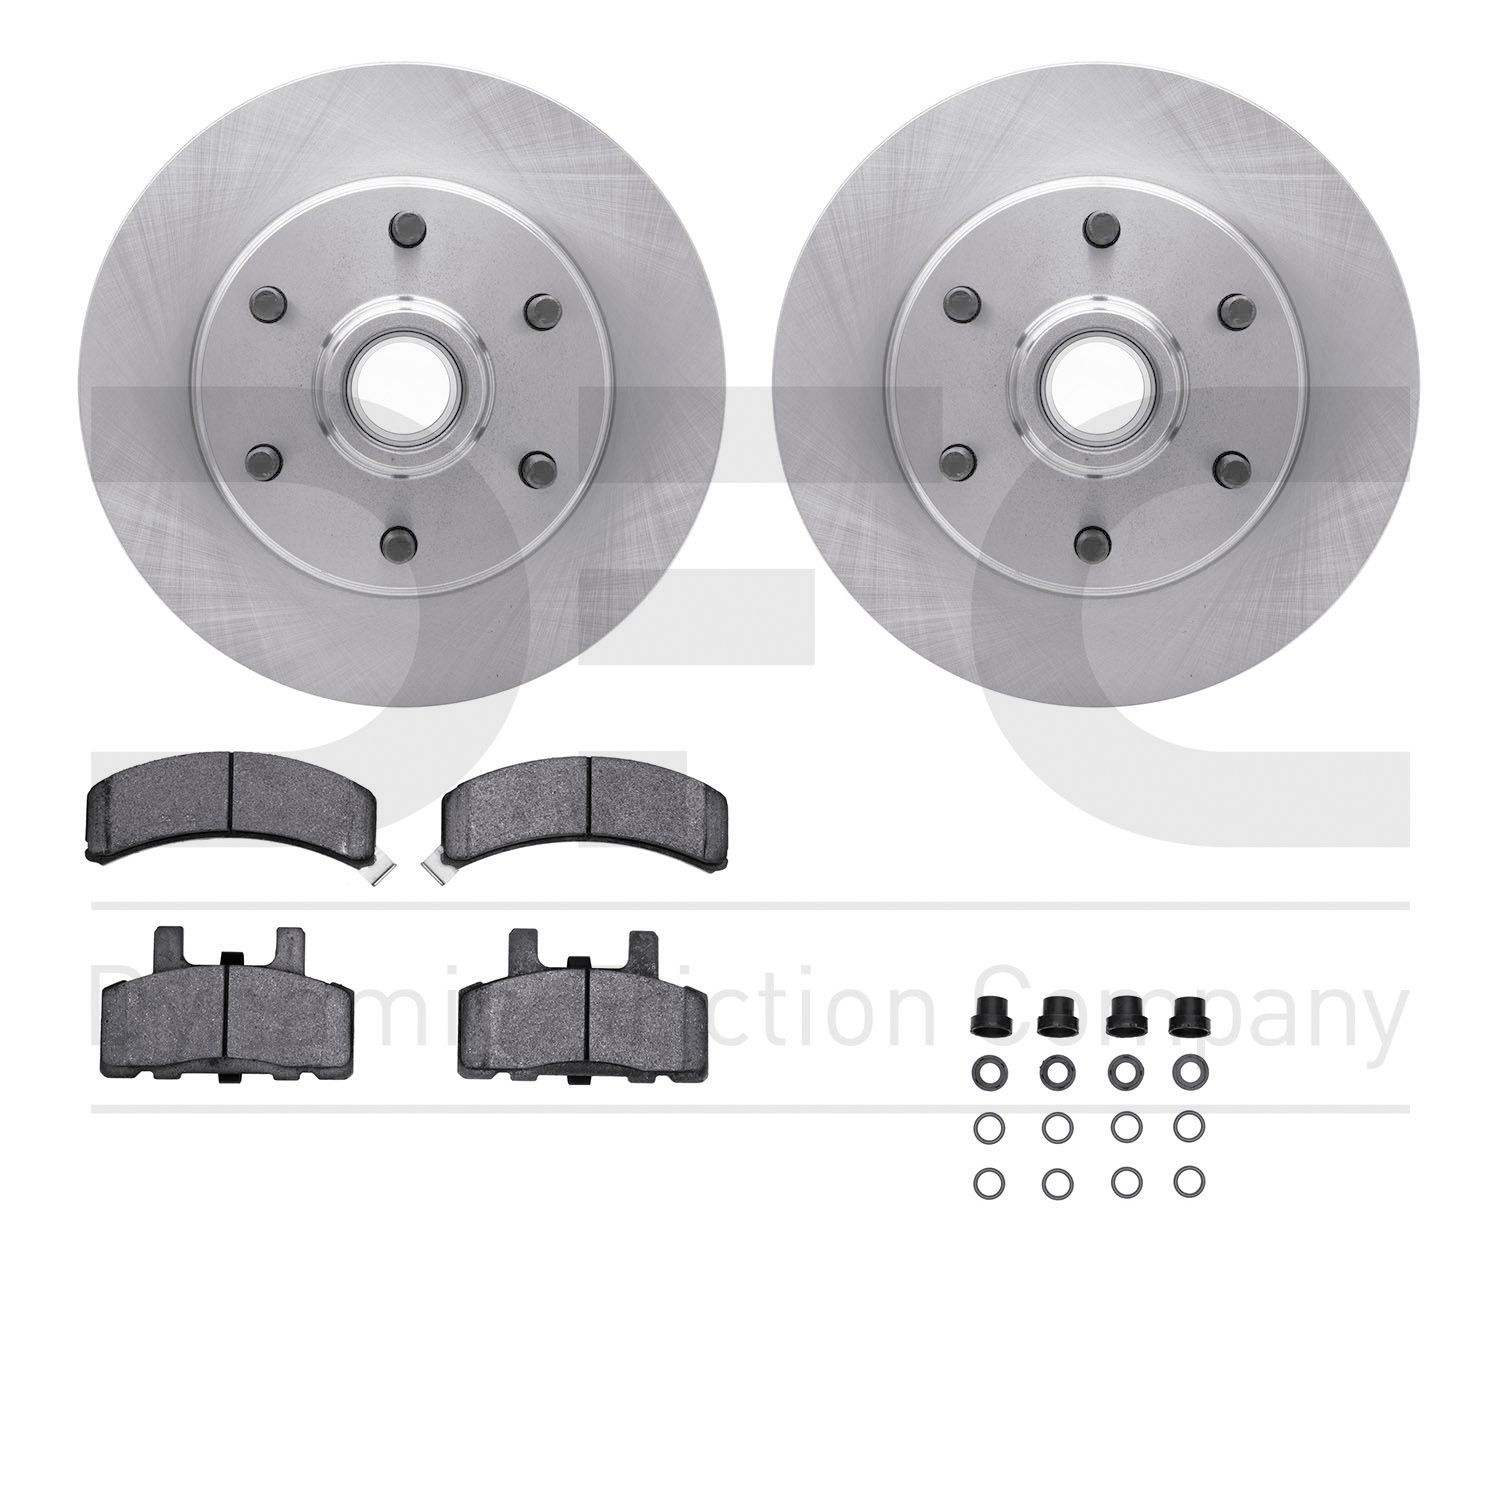 6412-48052 Brake Rotors with Ultimate-Duty Brake Pads Kit & Hardware, 1994-2002 GM, Position: Front